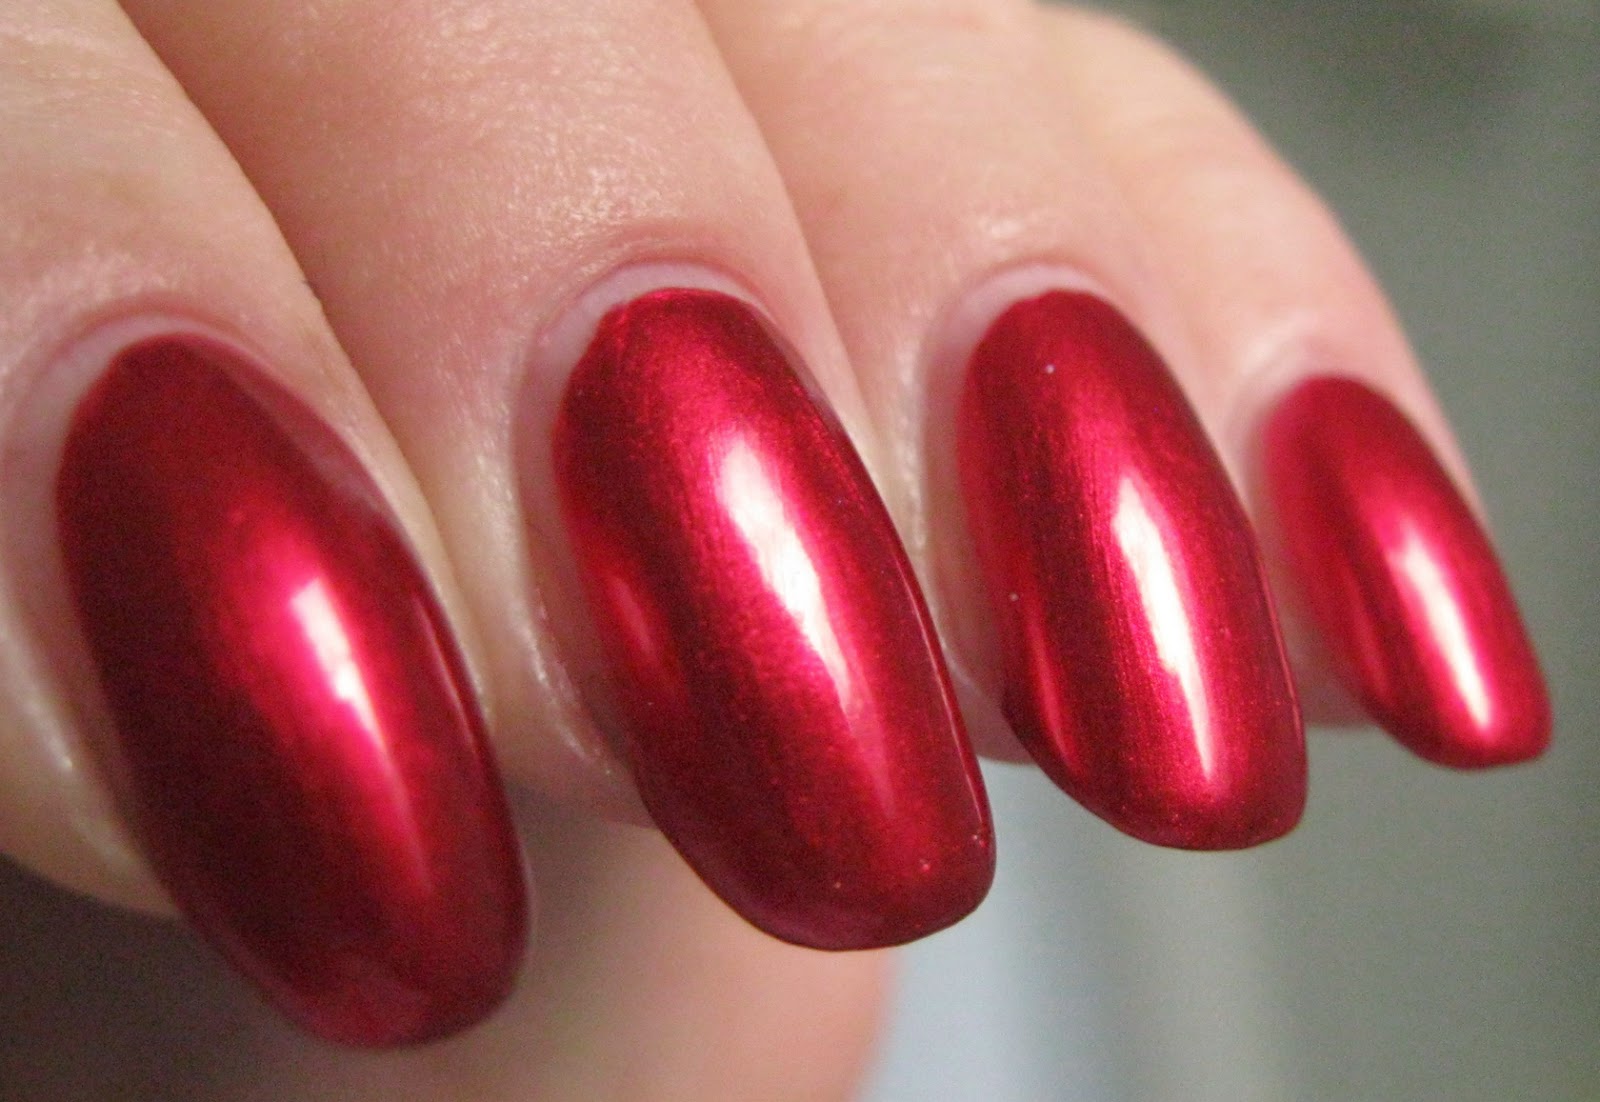 7. Butter London Nail Lacquer in "Knees Up" - wide 7